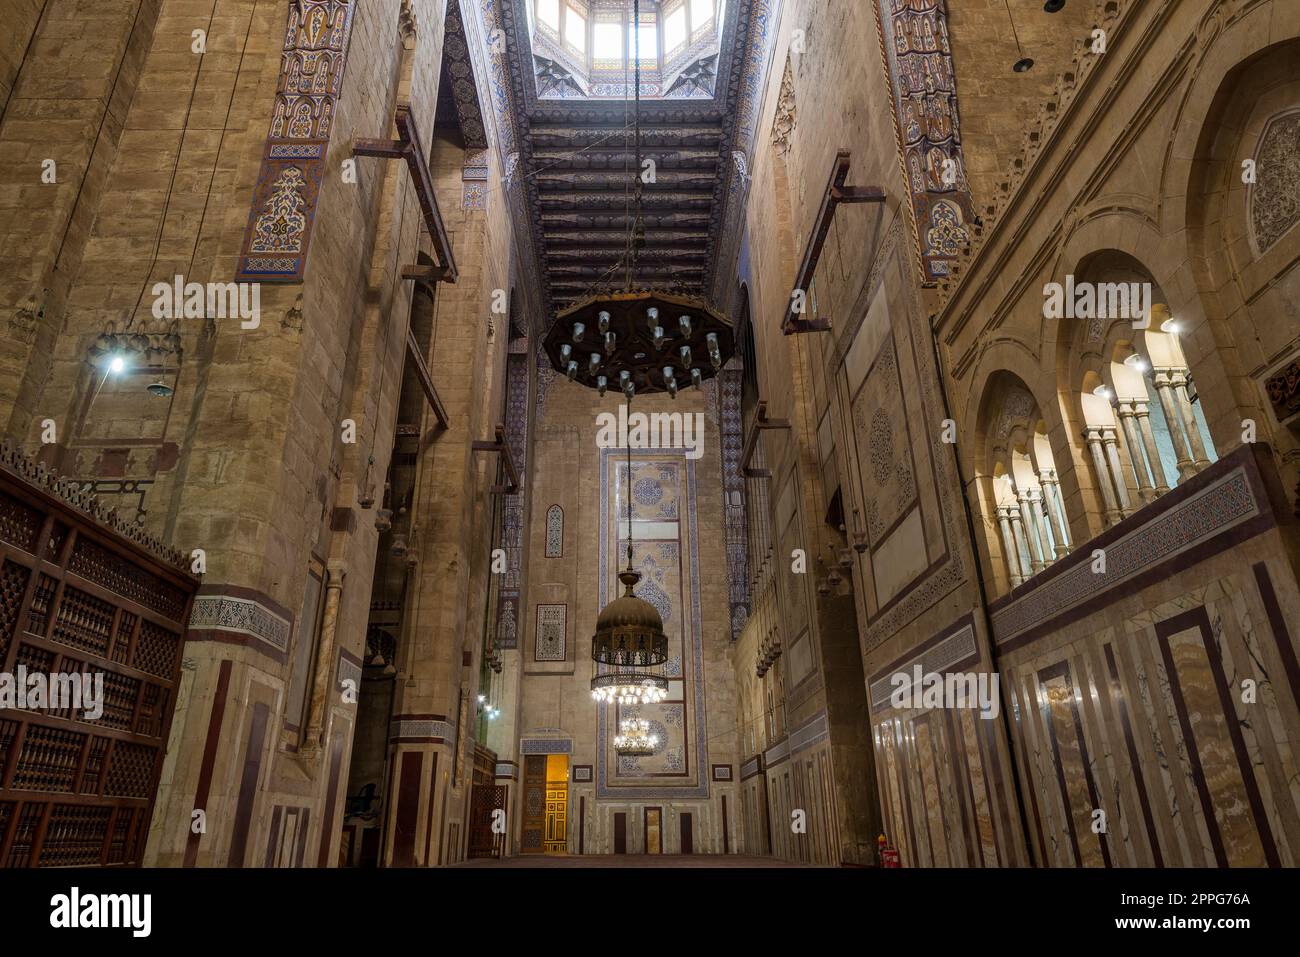 Interior of al Refai mosque with old decorated bricks stone wall and colored marble decorations, Cairo, Egypt Stock Photo